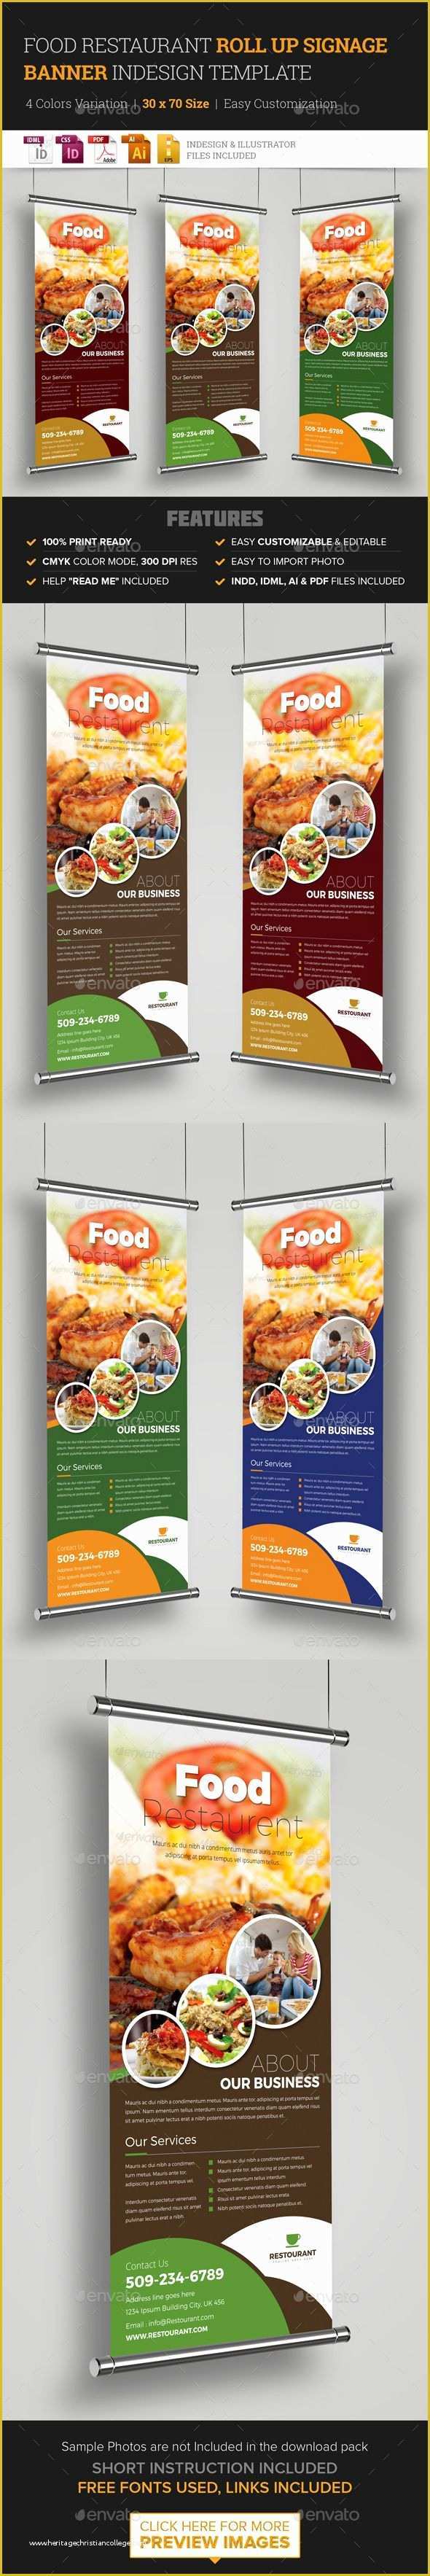 Food Banner Design Template Free Of Food Restaurant Roll Up Banner Signage Template